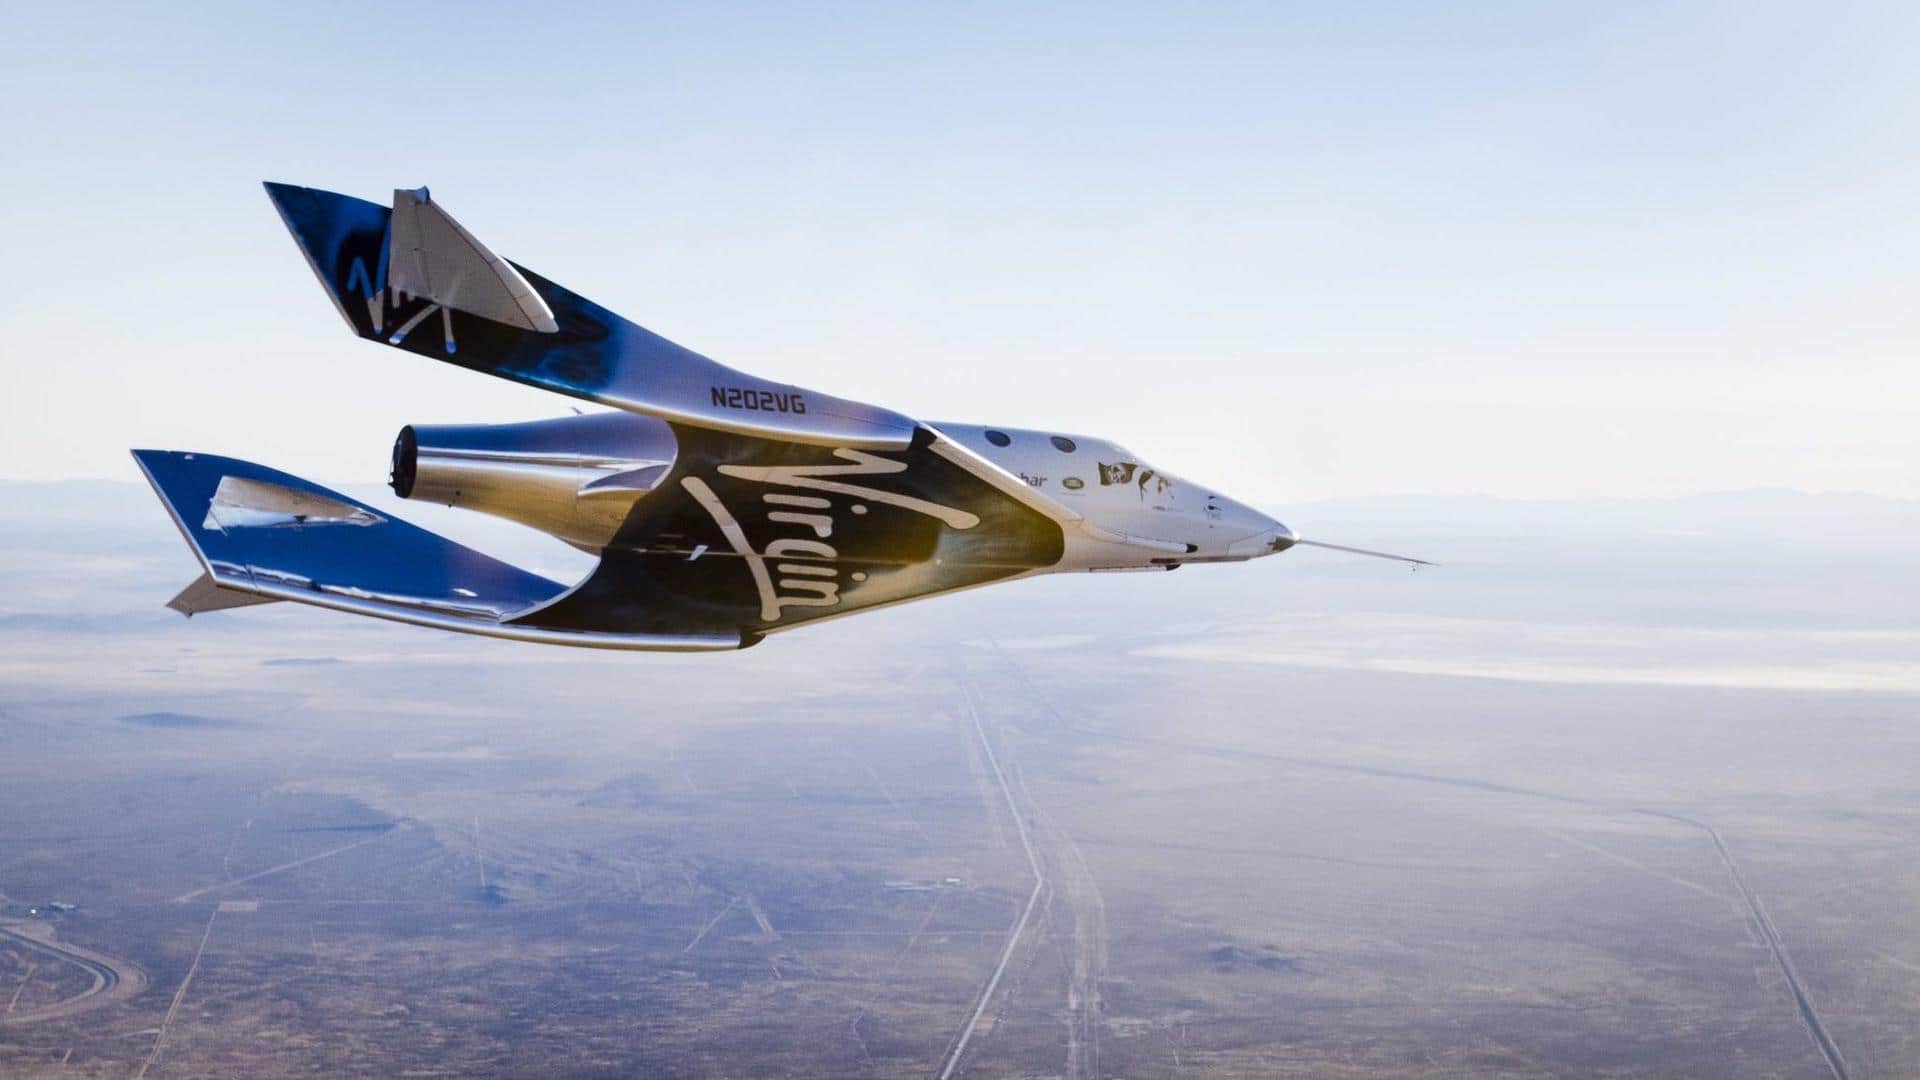 Virgin Galactic's first commercial spaceflight in June: Check ticket price